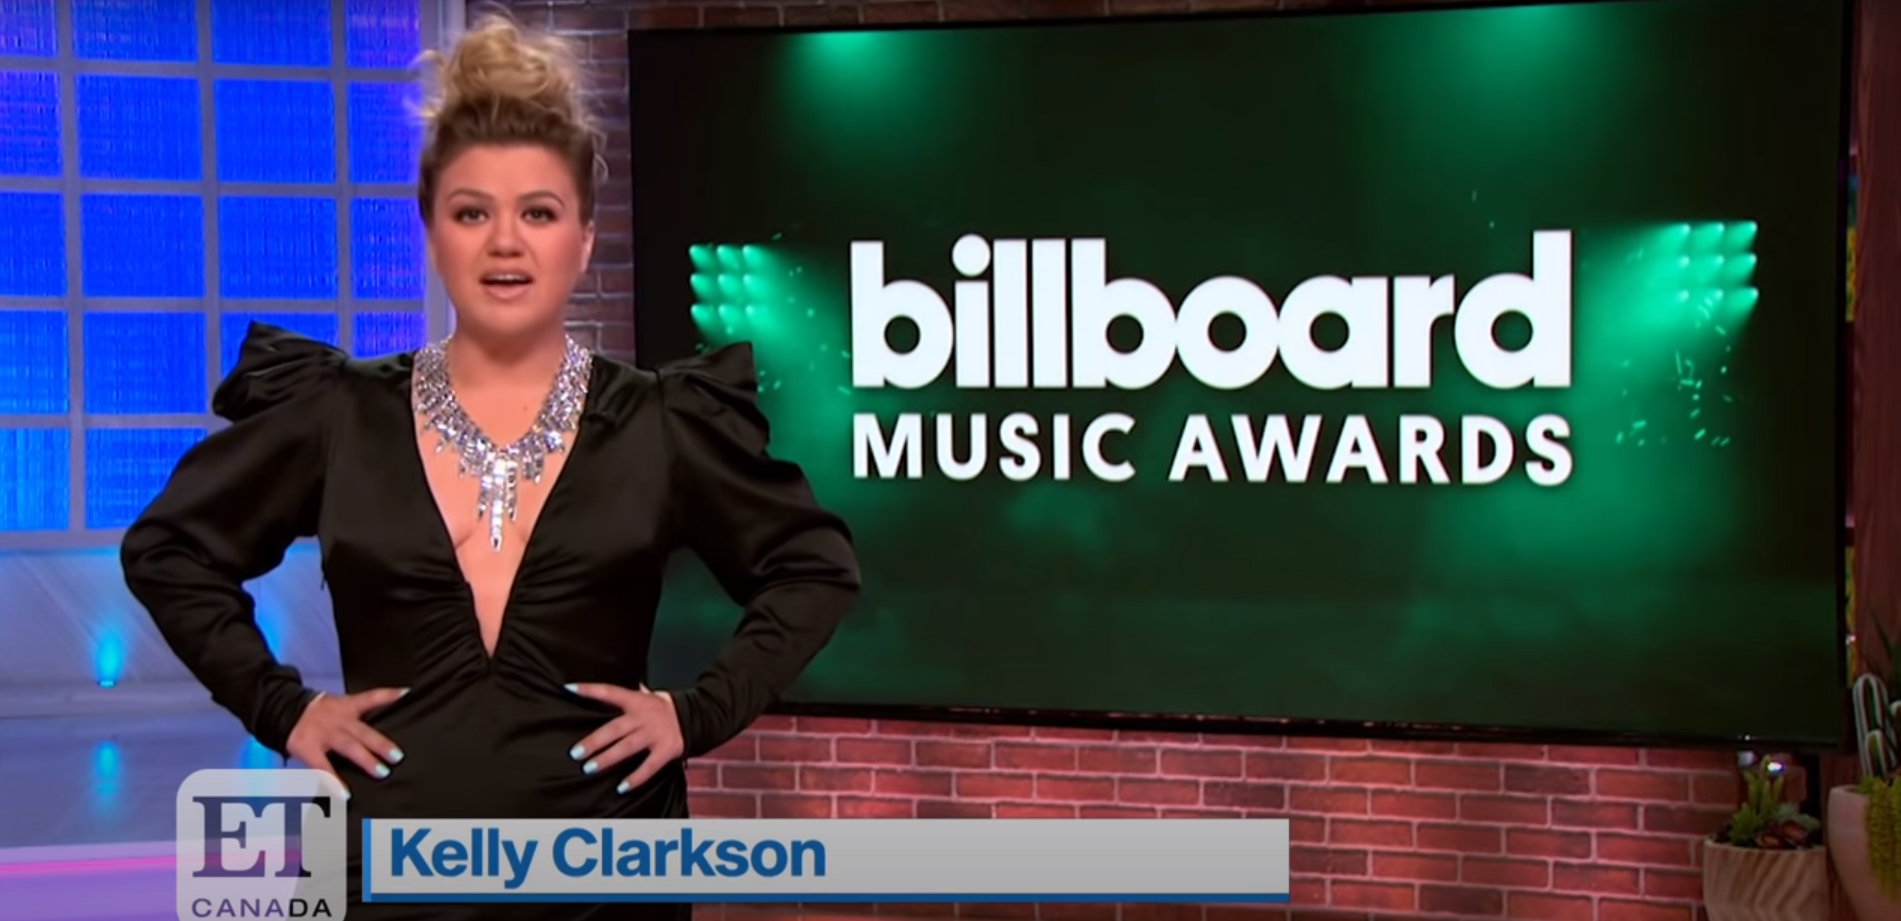 Kelly Clarkson is presenting the Billboard Music Awards 2020